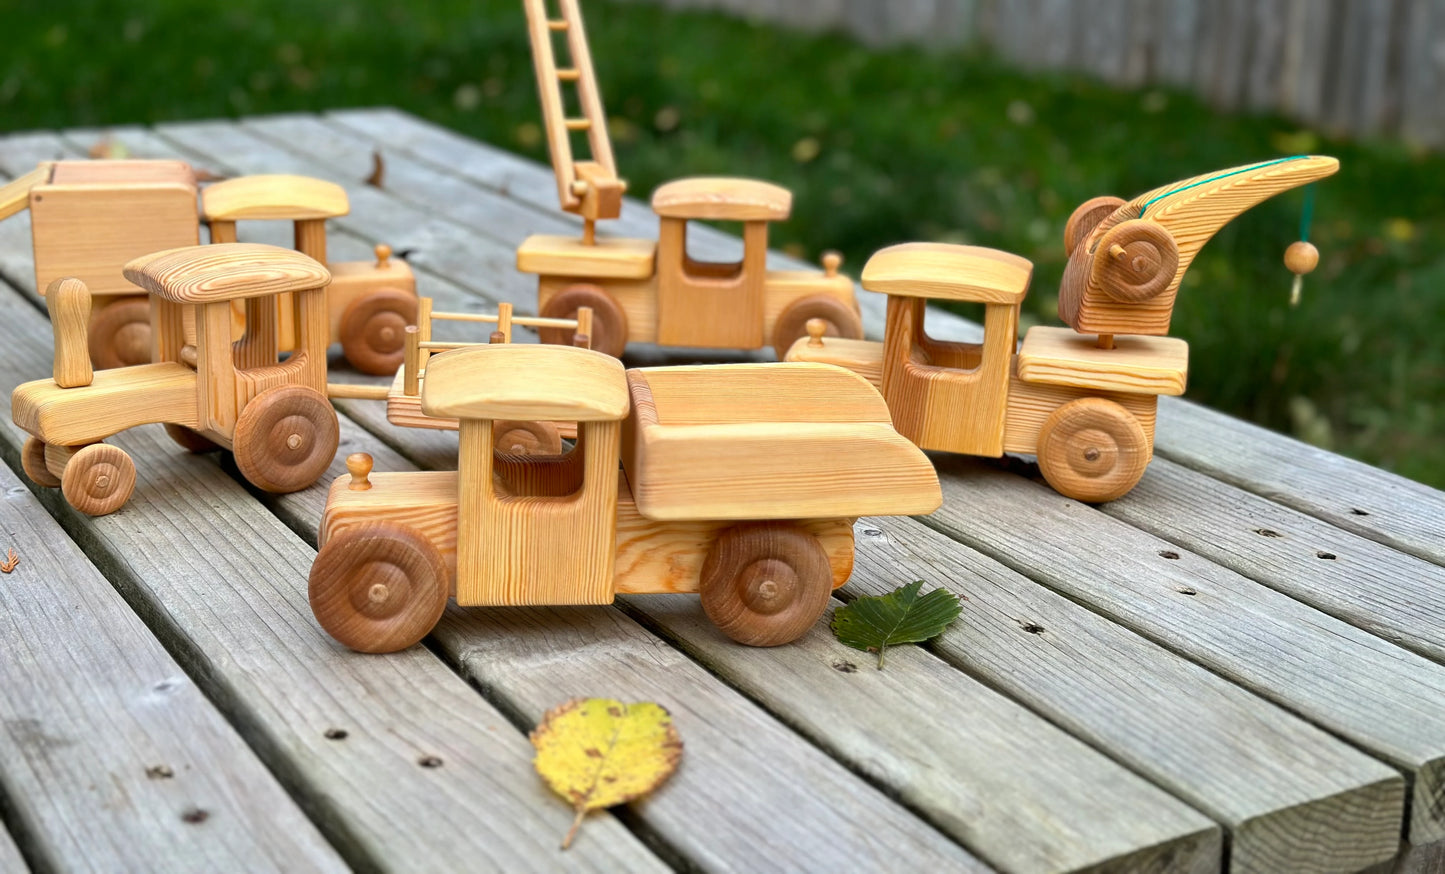 Debresk Wooden Toy Tractor w/ Trailer, Large | Wooden Toys